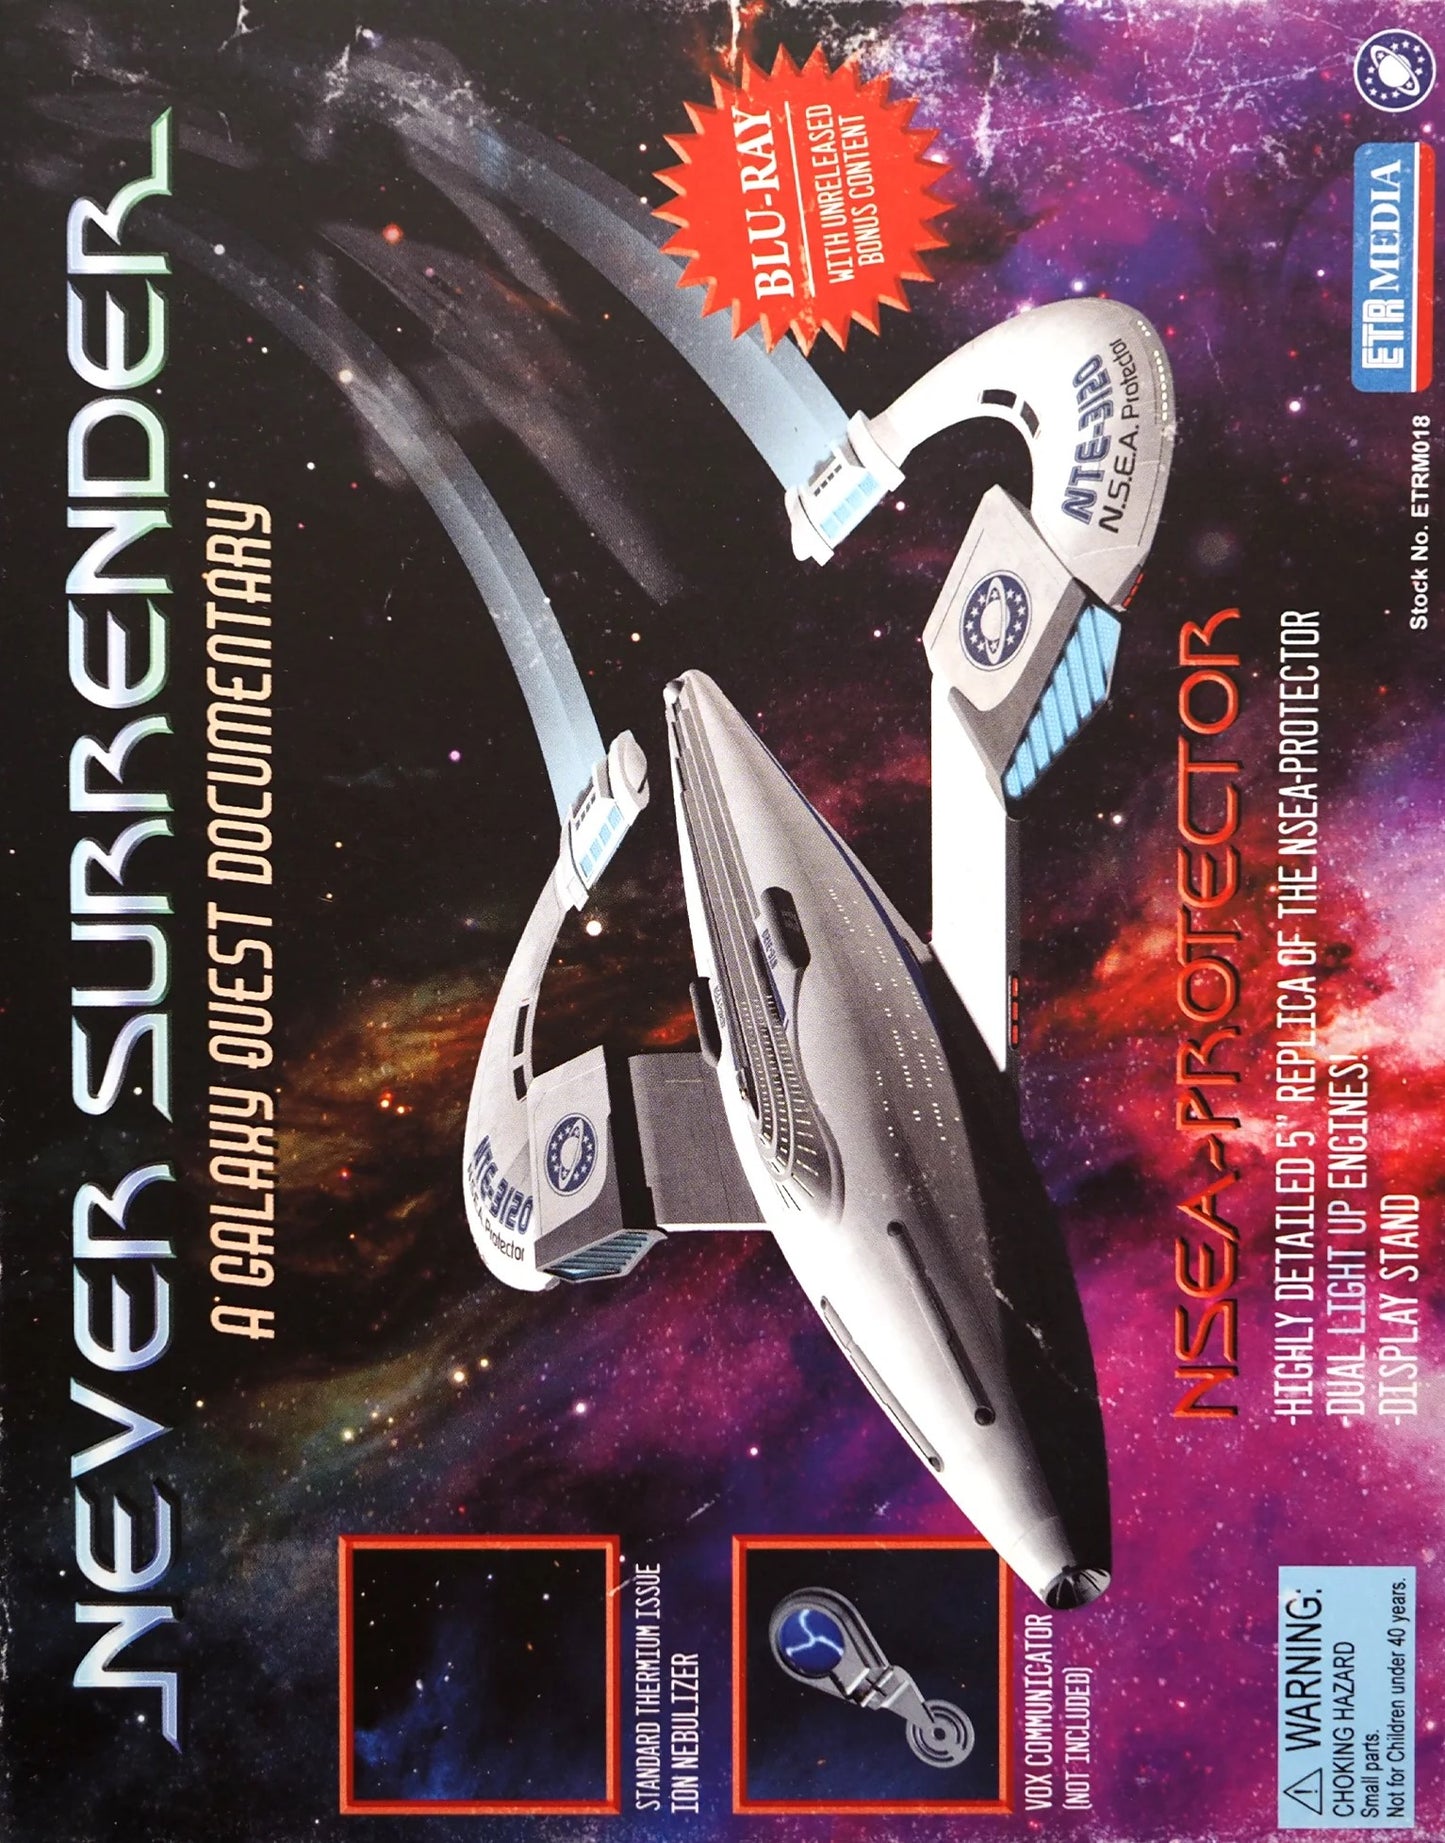 Never Surrender: A Galaxy Quest Documentary Limited Edition ETR Media Blu-Ray [NEW] [SLIPCOVER]